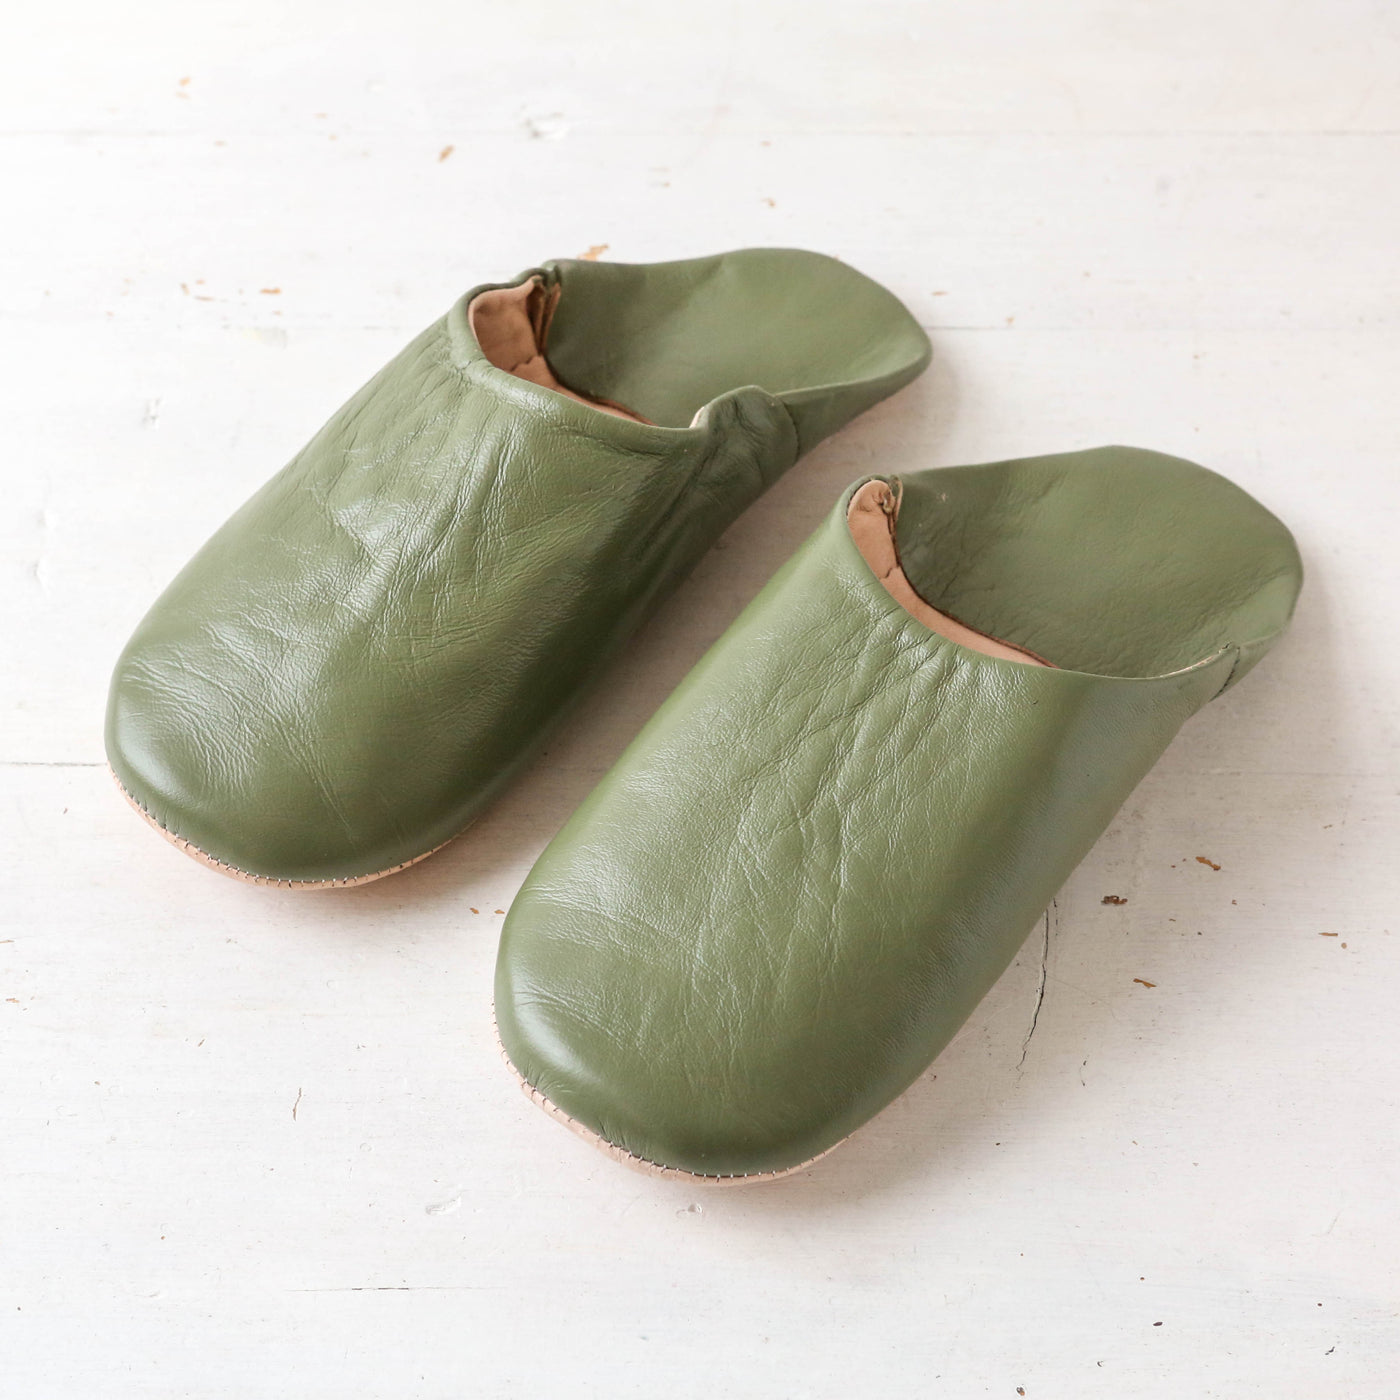 Moroccan Leather Babouche Slippers - Olive